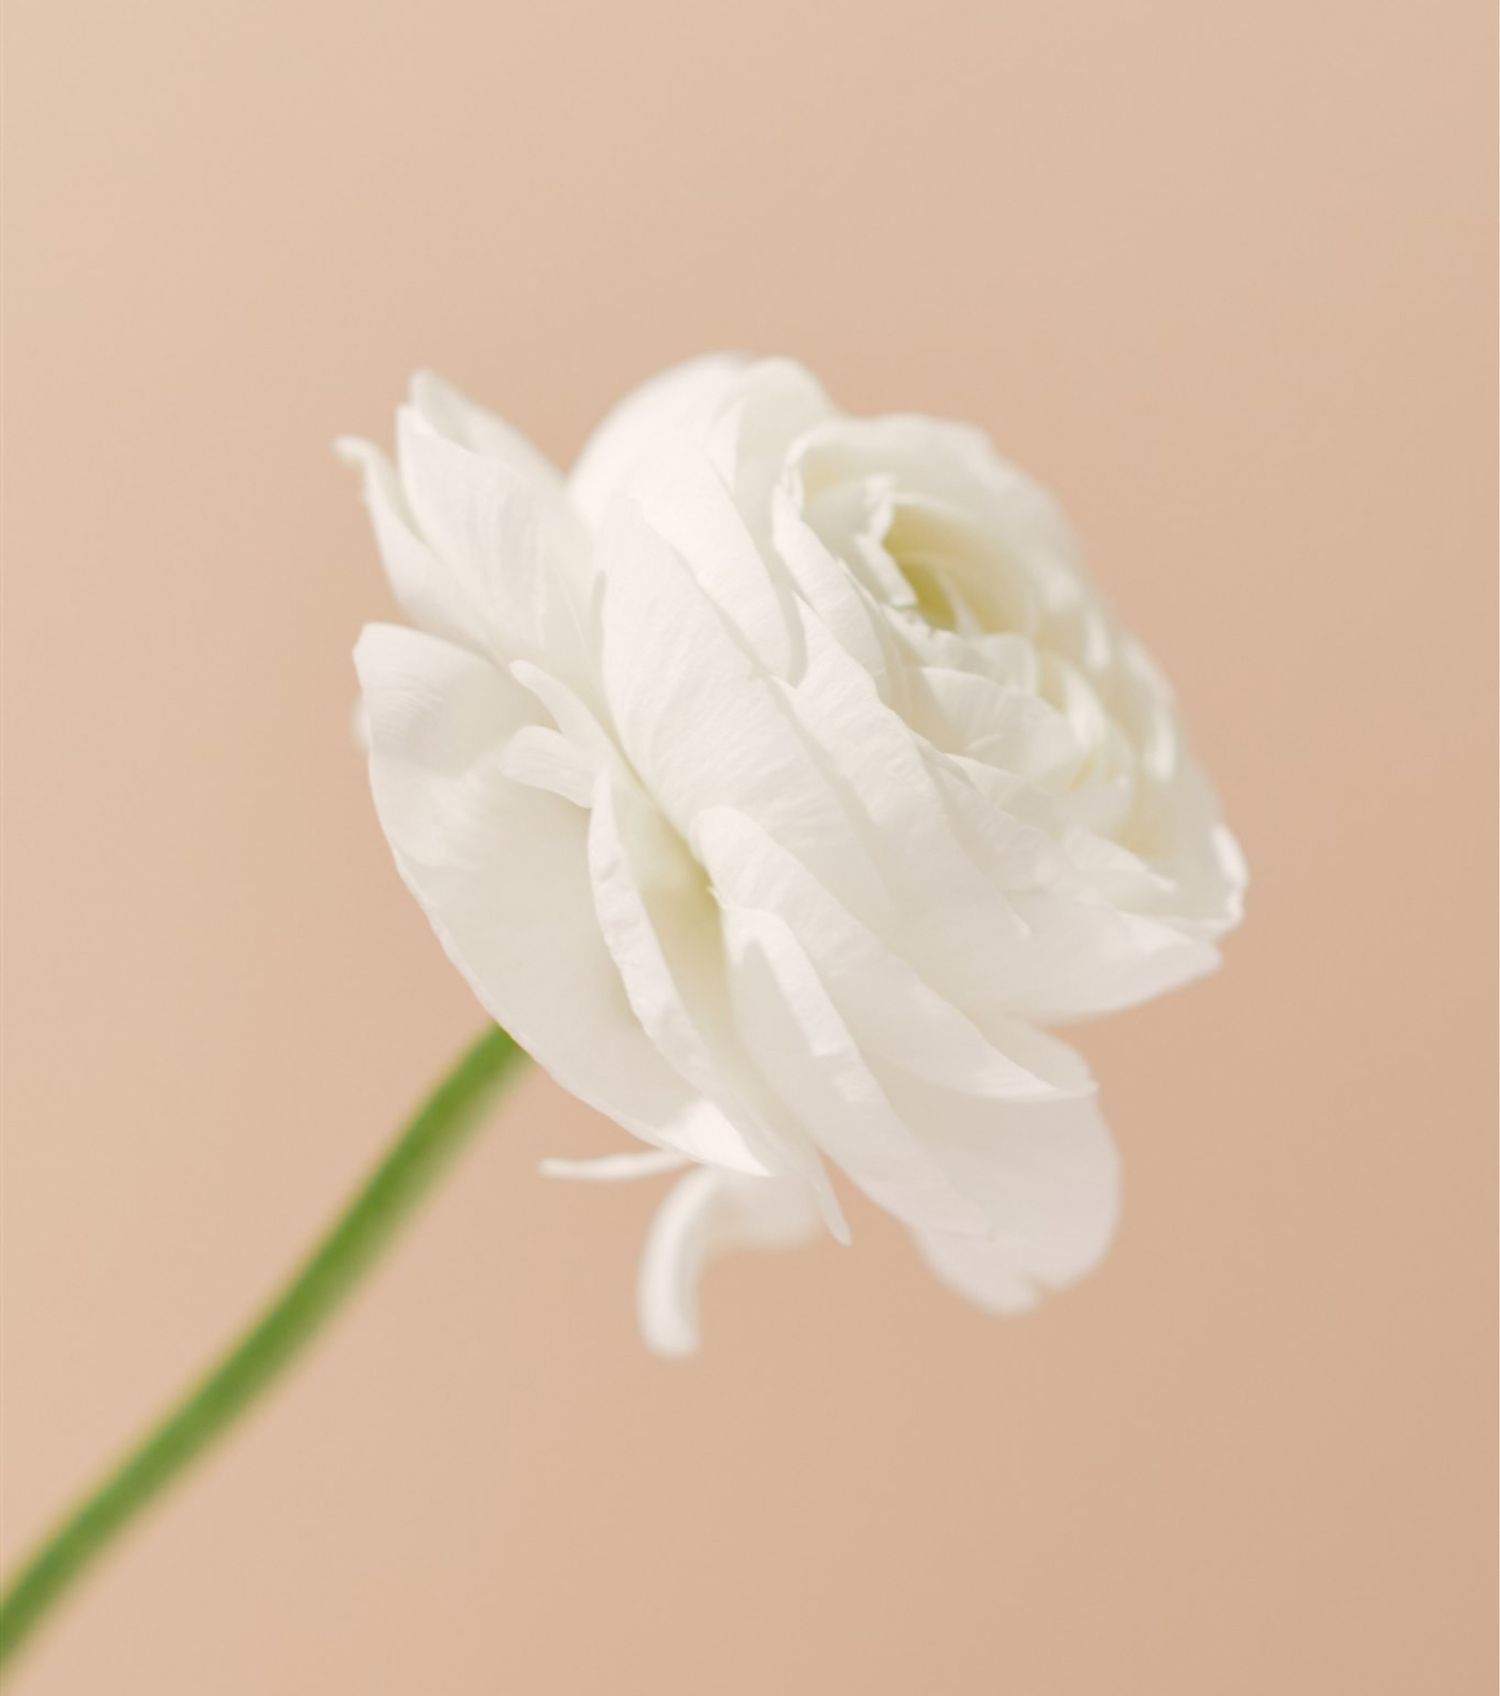 A single white ranunculus blossom silhouetted on a light peach-colored background